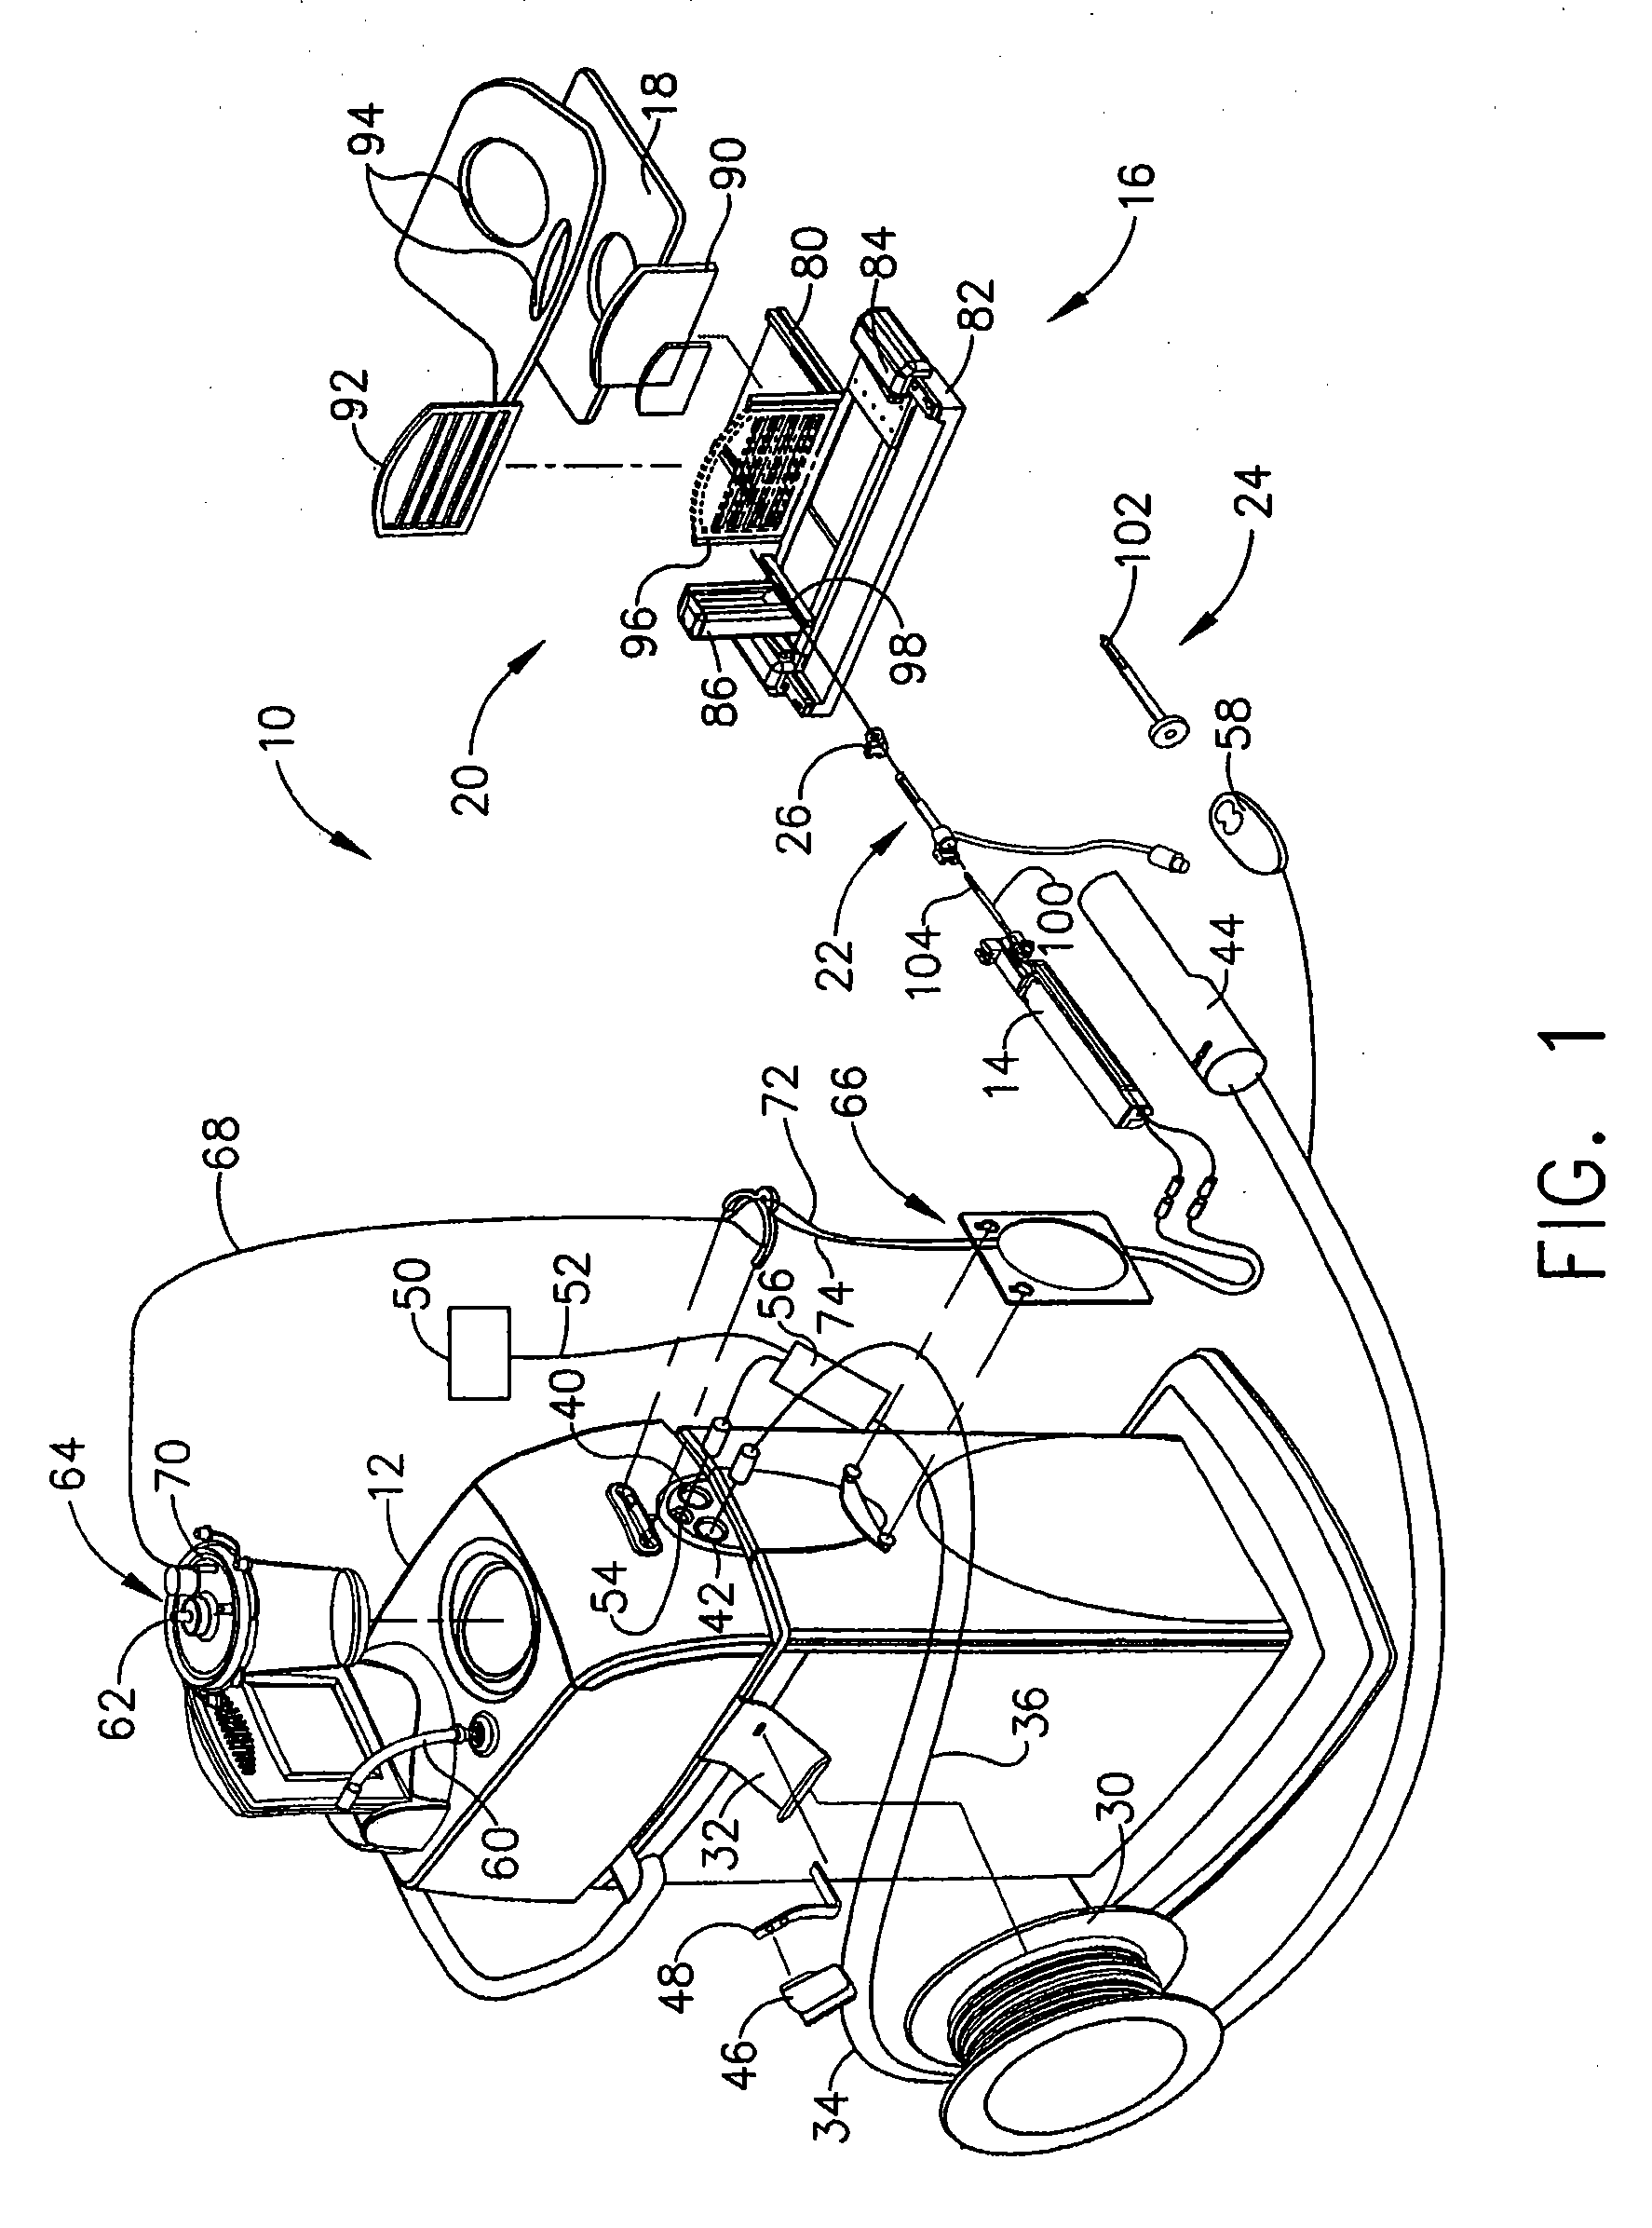 MRI Biopsy Apparatus Incorporating a Sleeve and Multi-Function Obturator